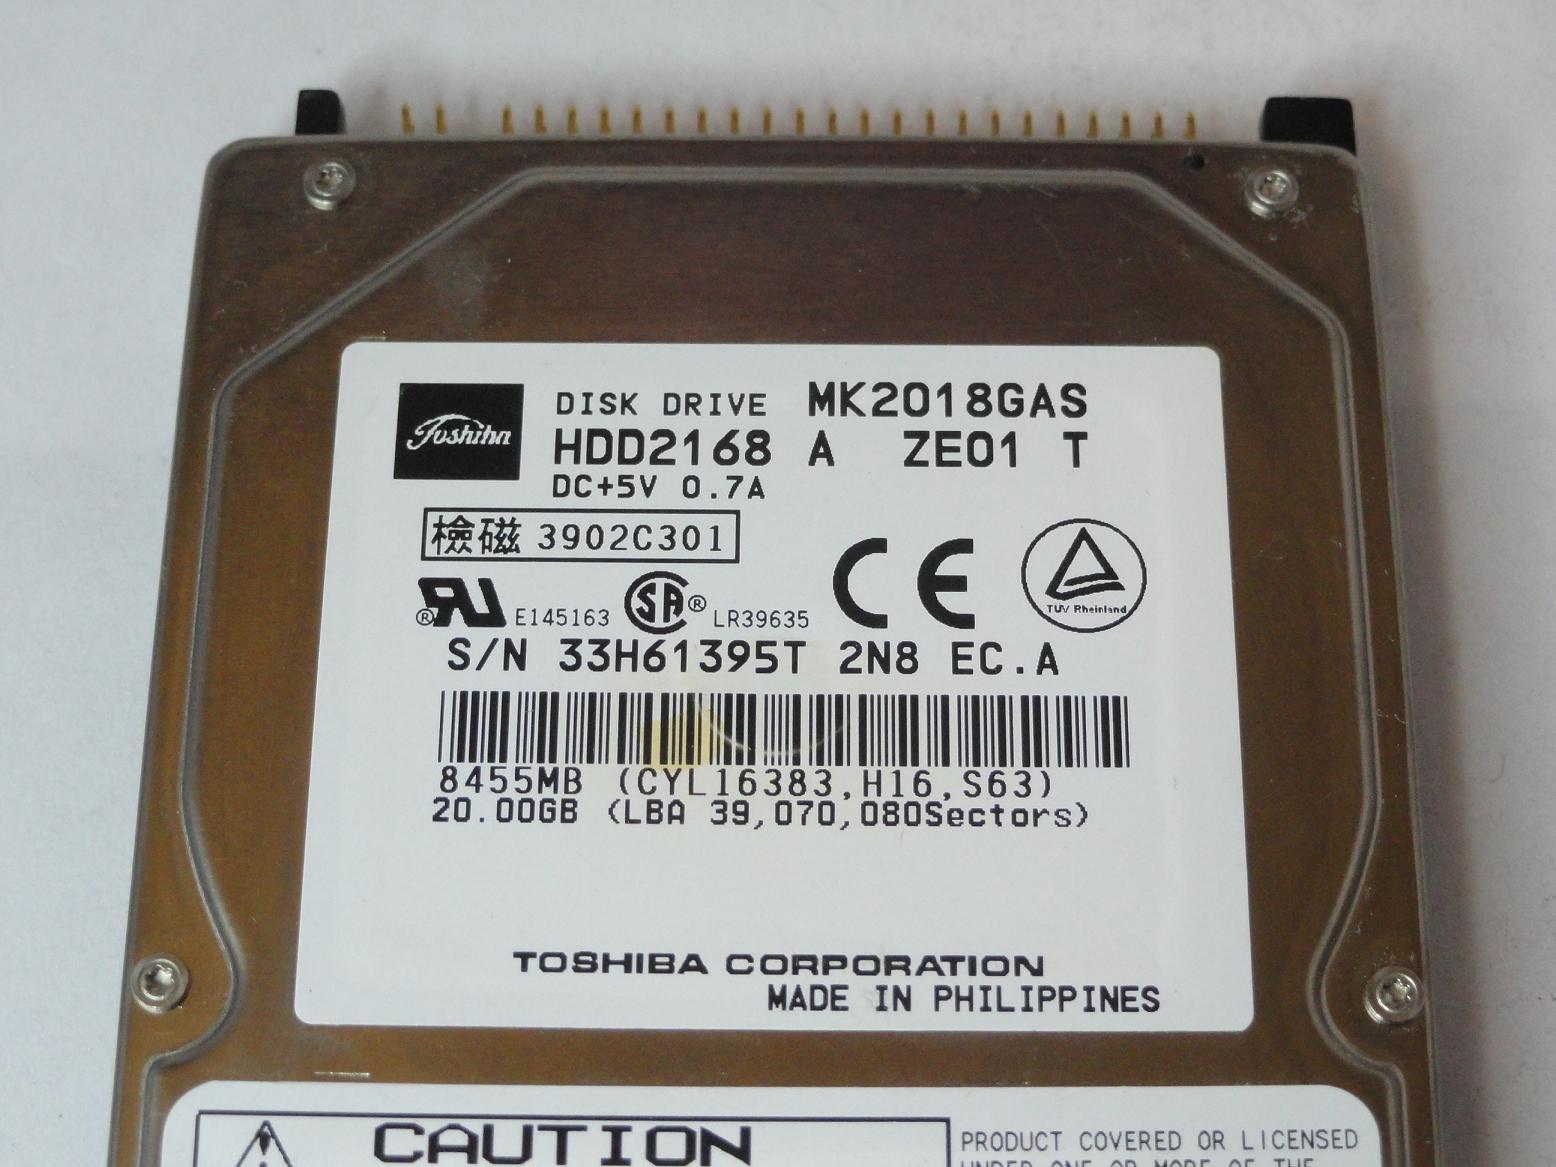 MC4316_HDD2168_Toshiba 20GB IDE 4200rpm 2.5in Laptop HDD - Image3